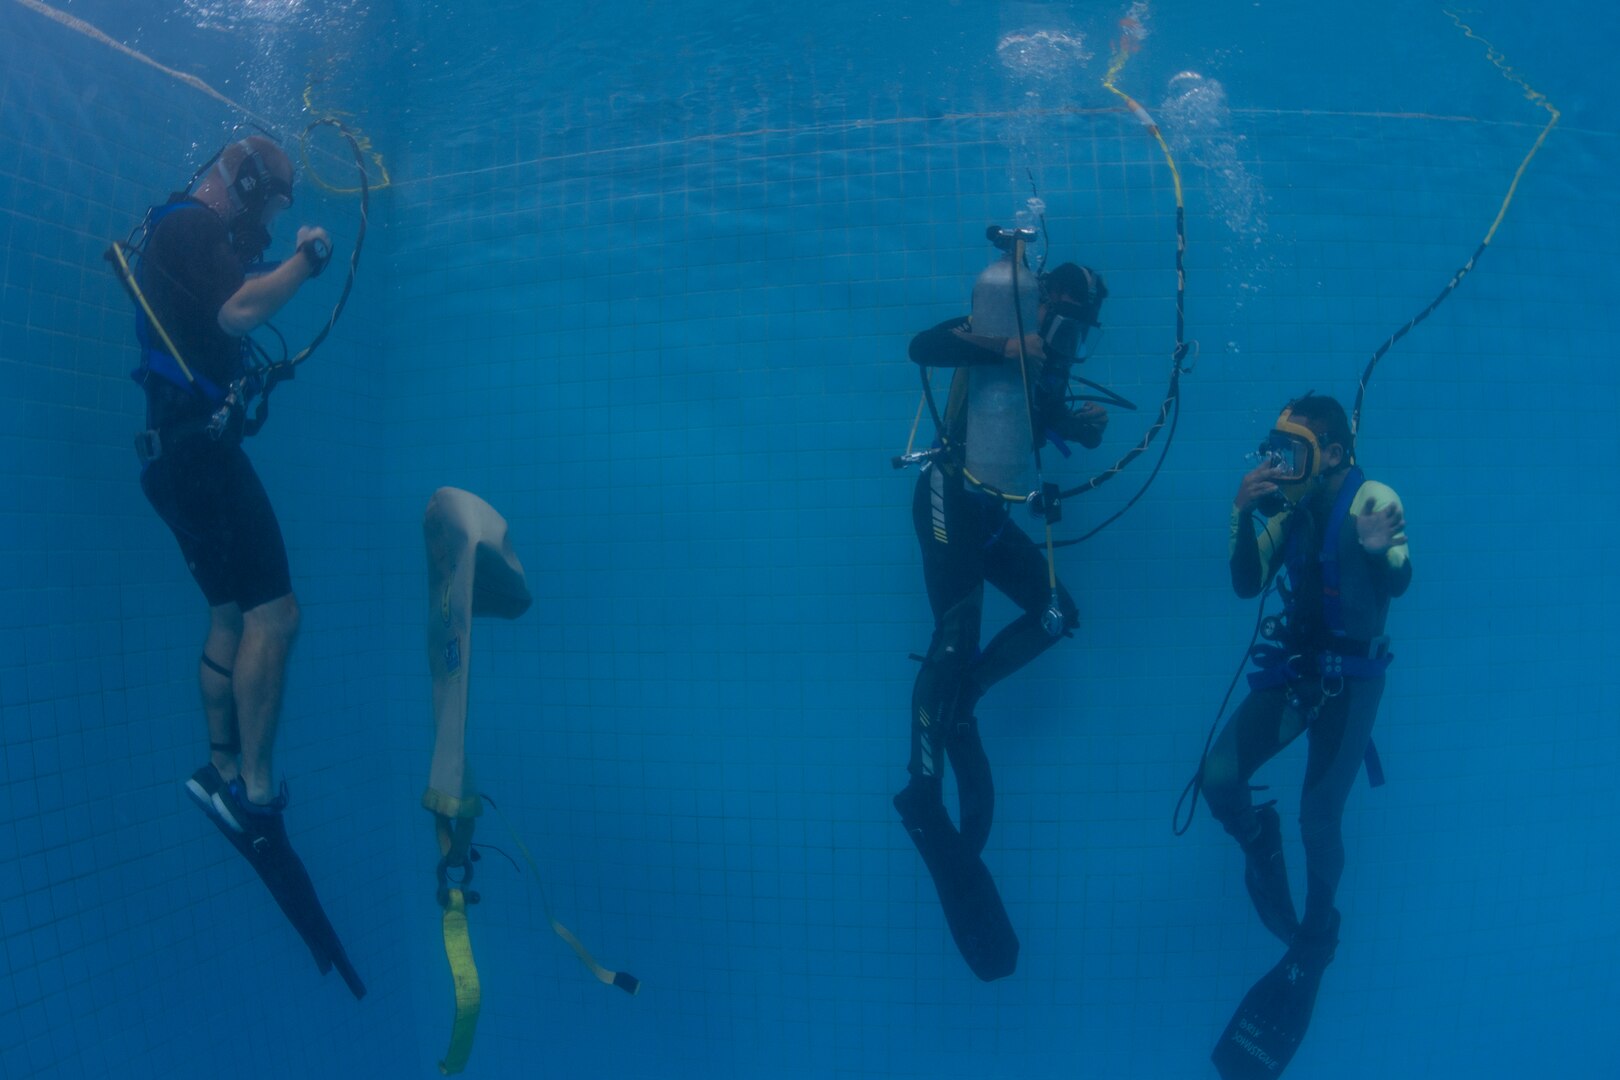 U.S. Navy Diver 1st Class John Reinemund, assigned to Mobile Diving and Salvage Unit 1, observes Royal Thai Navy divers as they descend the water column in the RTN Dive School pool in Sattahip, Thailand for Exercise Cobra Gold Feb. 19, 2018. Cobra Gold 18 provides a venue for the United States, allied and partner nations to advance interoperability and increase partner capacity in planning and executing complex and realistic multinational force and combined task force operations.